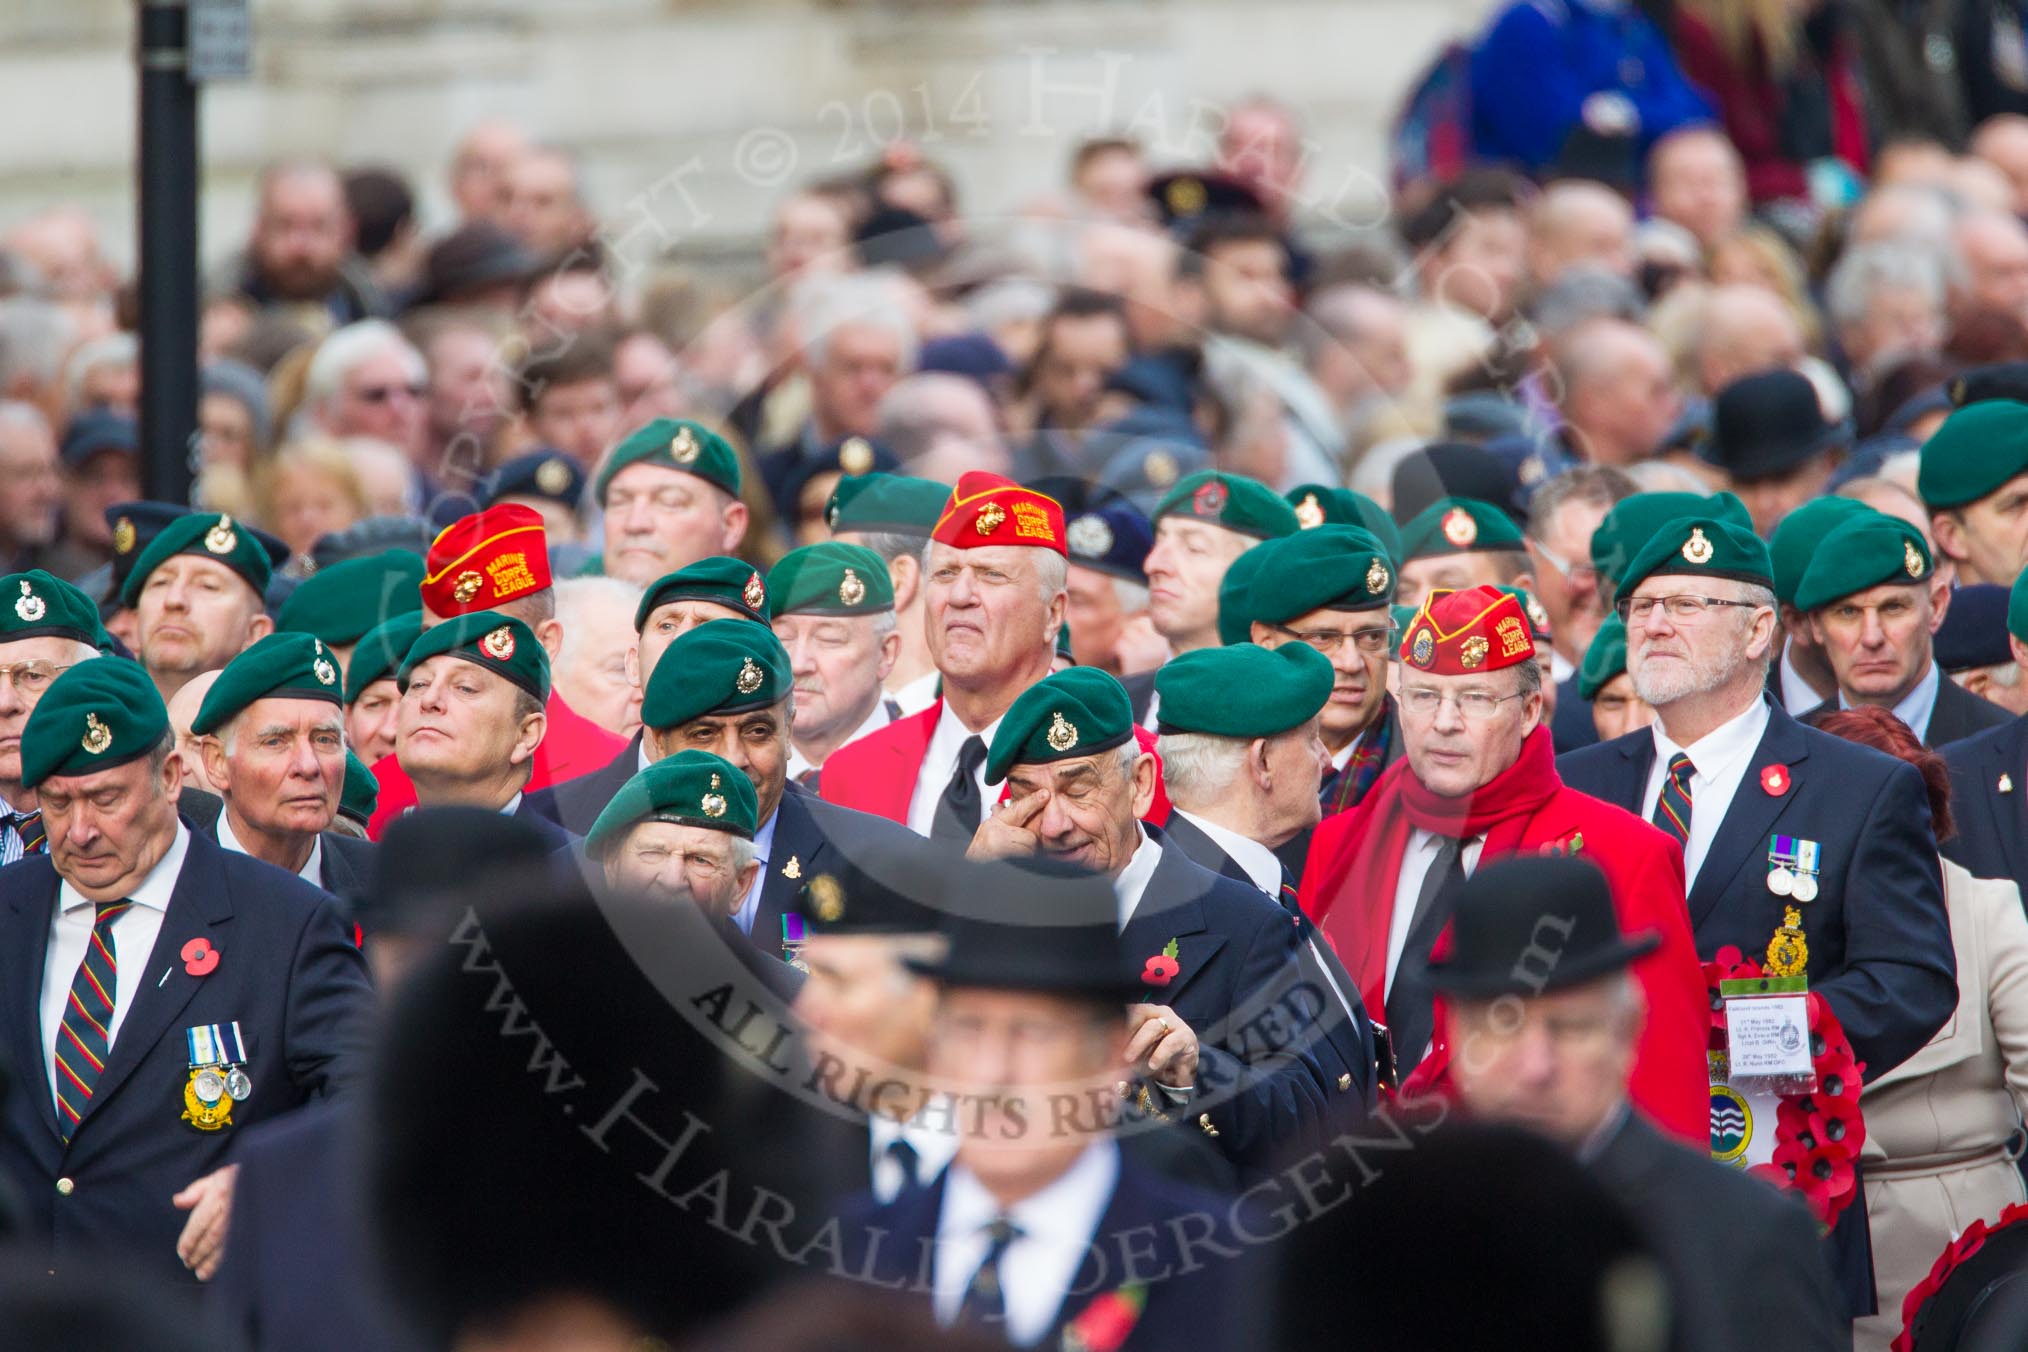 Remembrance Sunday at the Cenotaph in London 2014: Group E1, Royal Marines Association, leading column E.
Press stand opposite the Foreign Office building, Whitehall, London SW1,
London,
Greater London,
United Kingdom,
on 09 November 2014 at 11:32, image #4